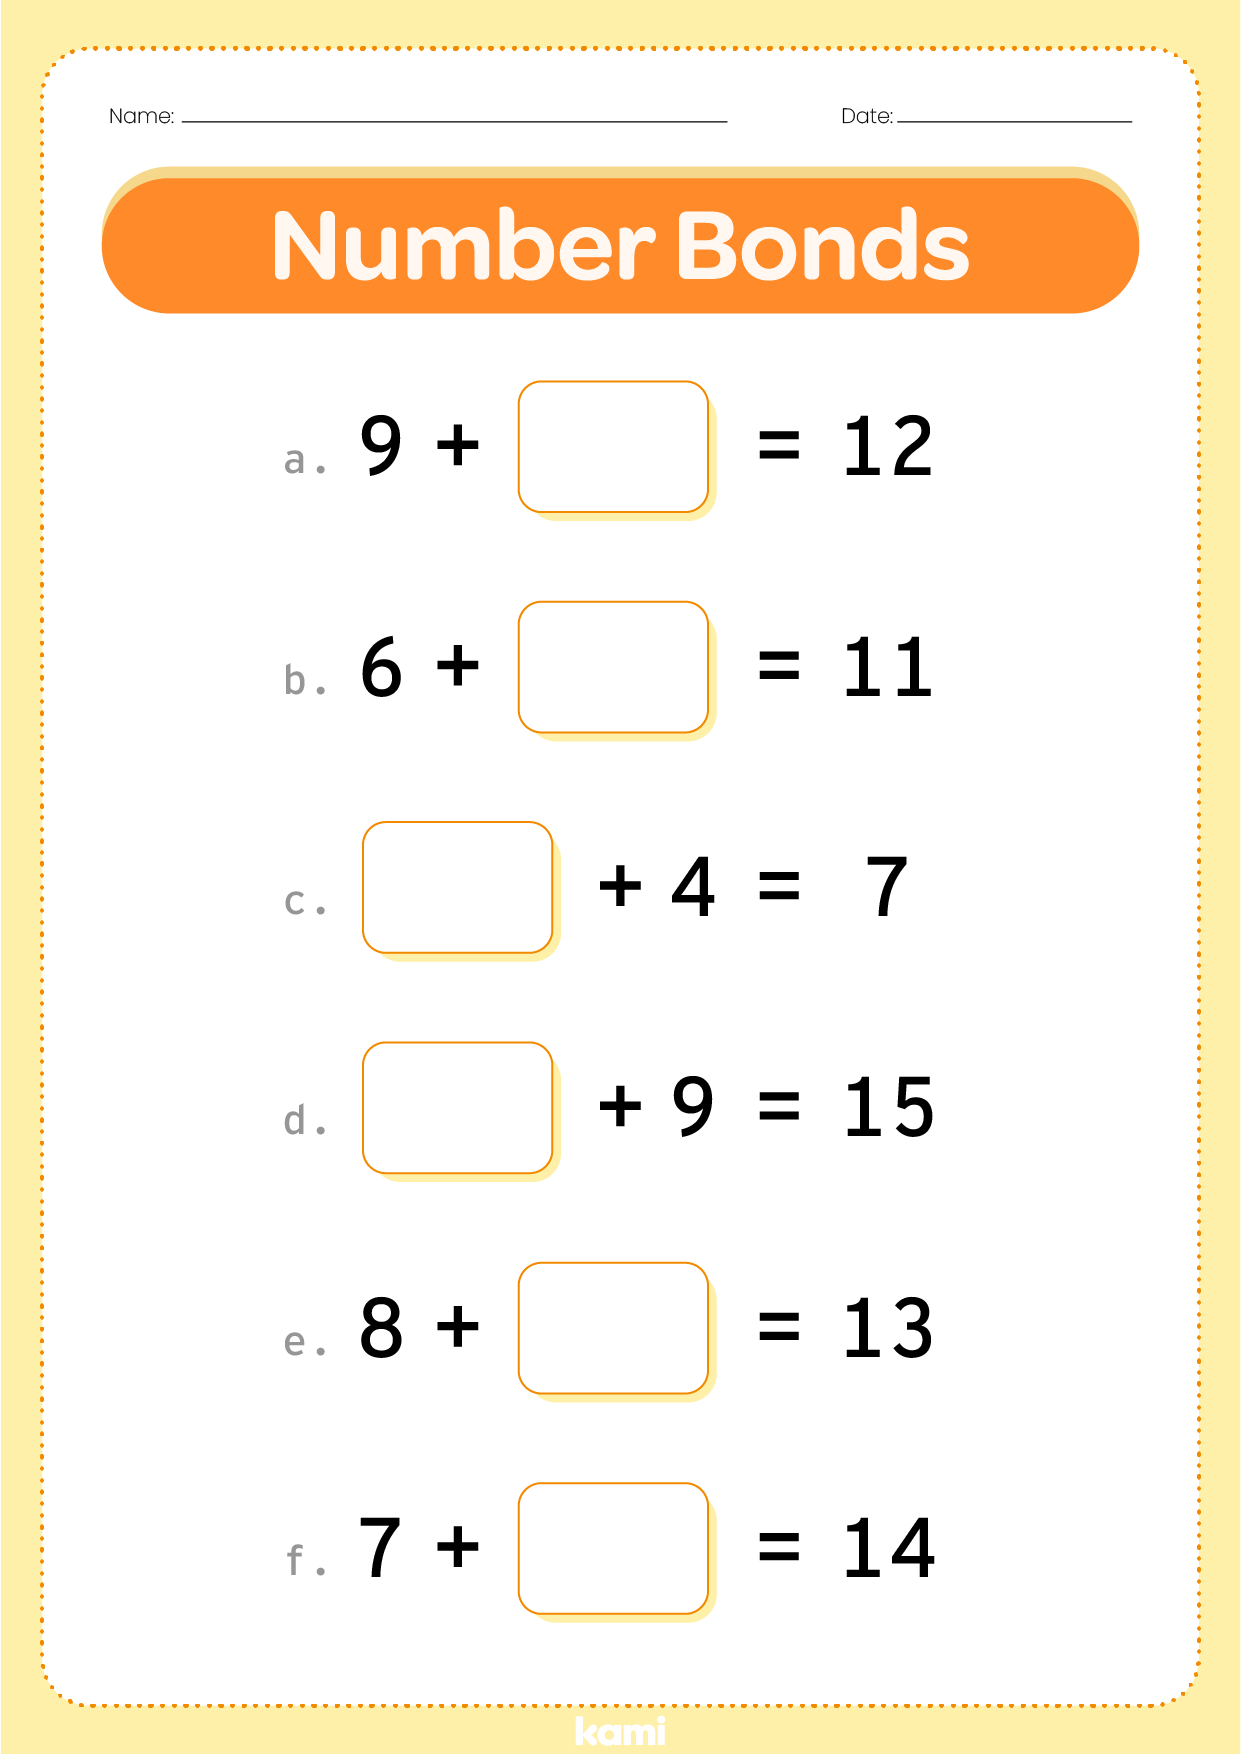 Number Bonds Worksheet For Teachers Perfect For Grades 1st 2nd 3rd 4th 5th Math 2061